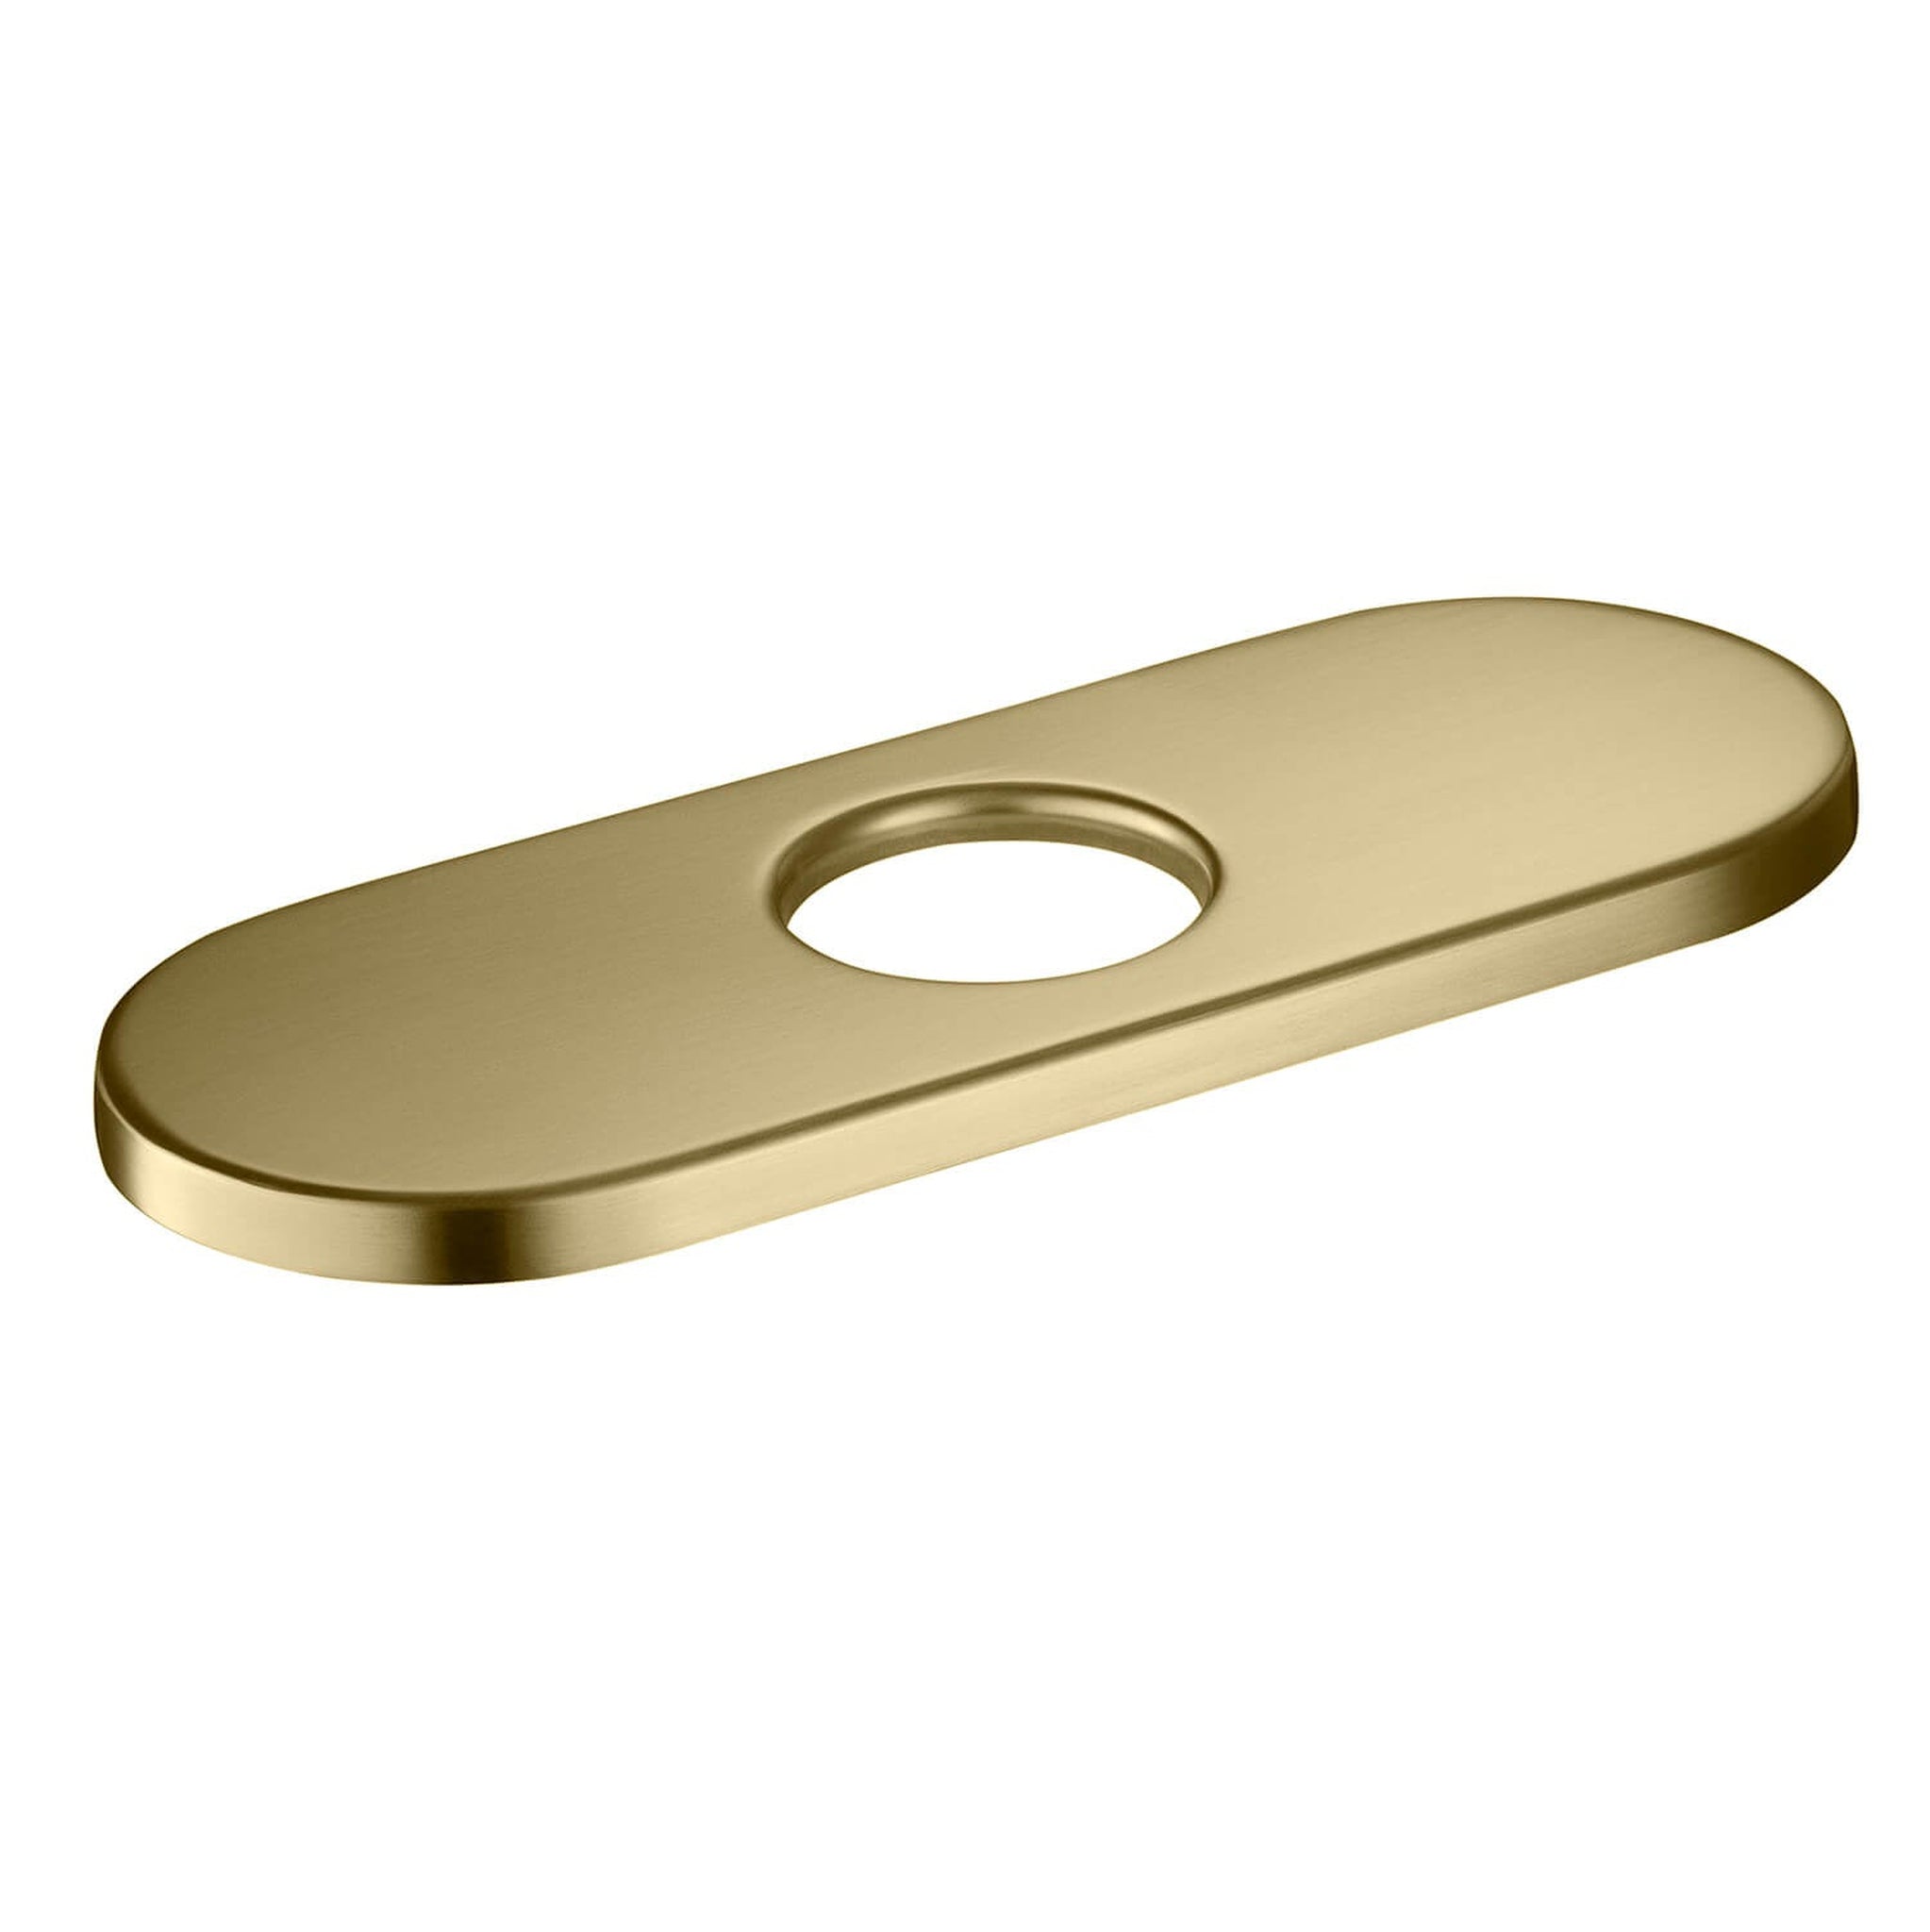 KIBI, KIBI 6" Stainless Steel Faucet Hole Cover in Brushed Gold Finish